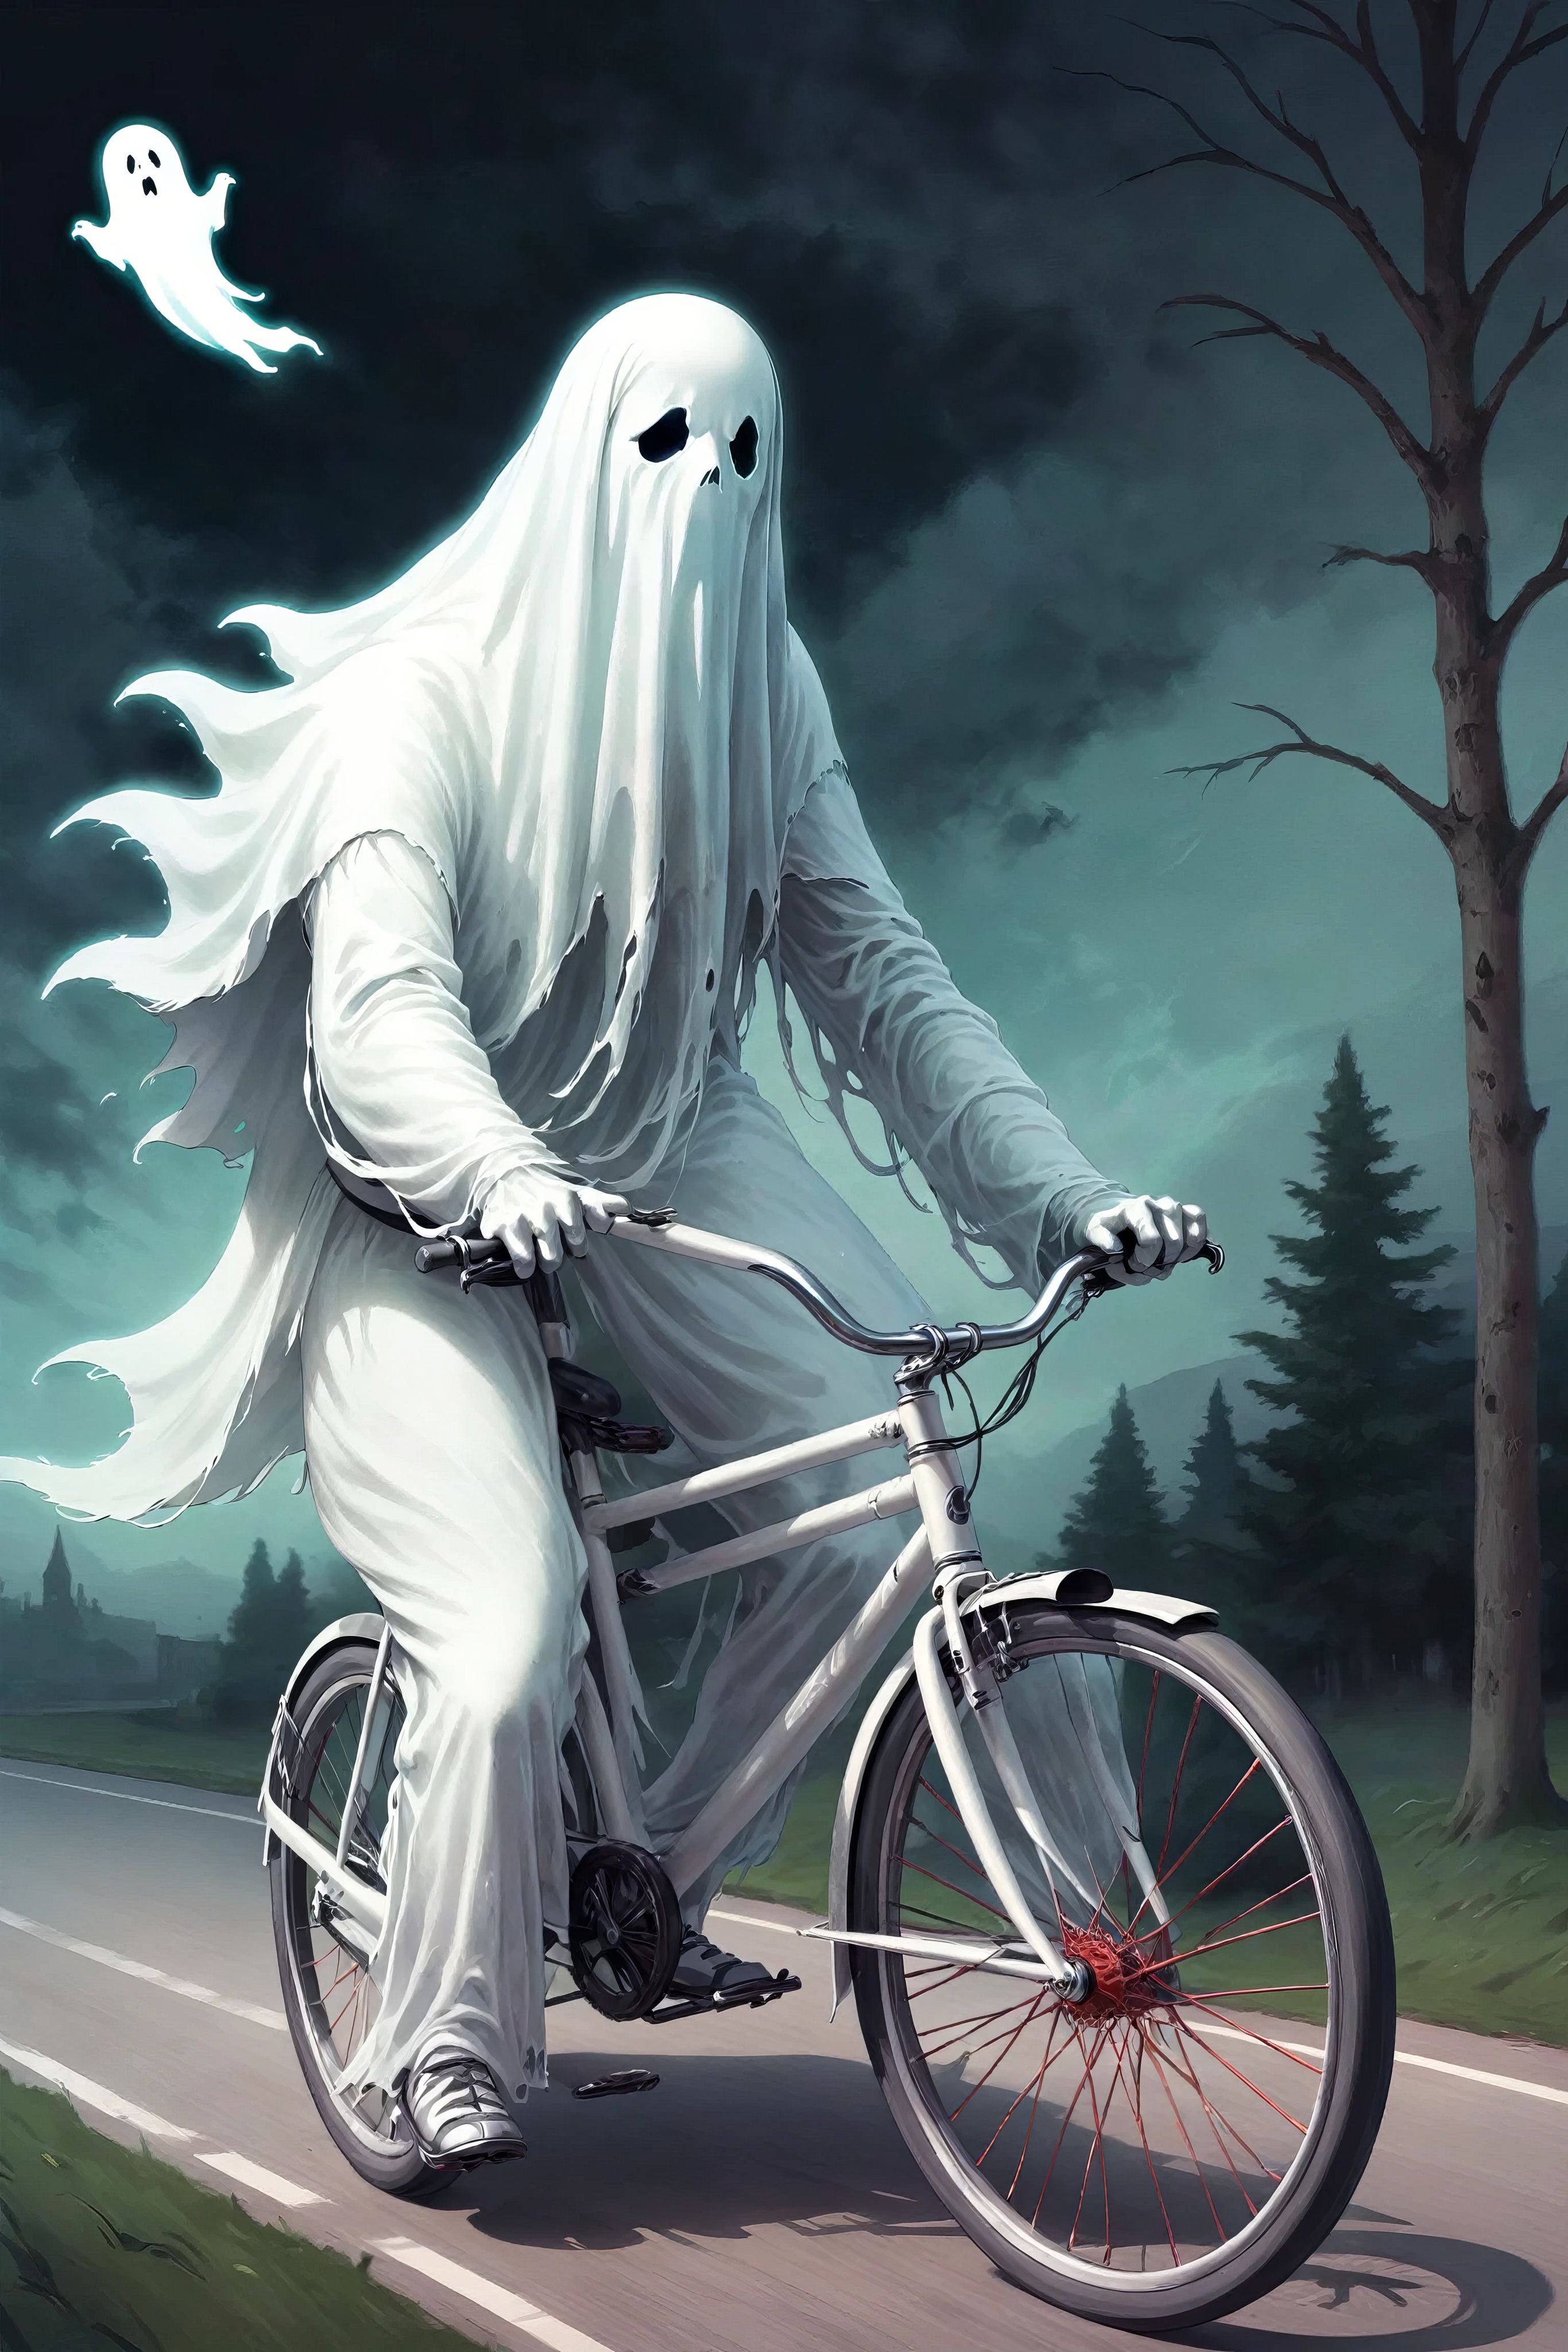 A scary ghost riding a bicycle on a road at night.